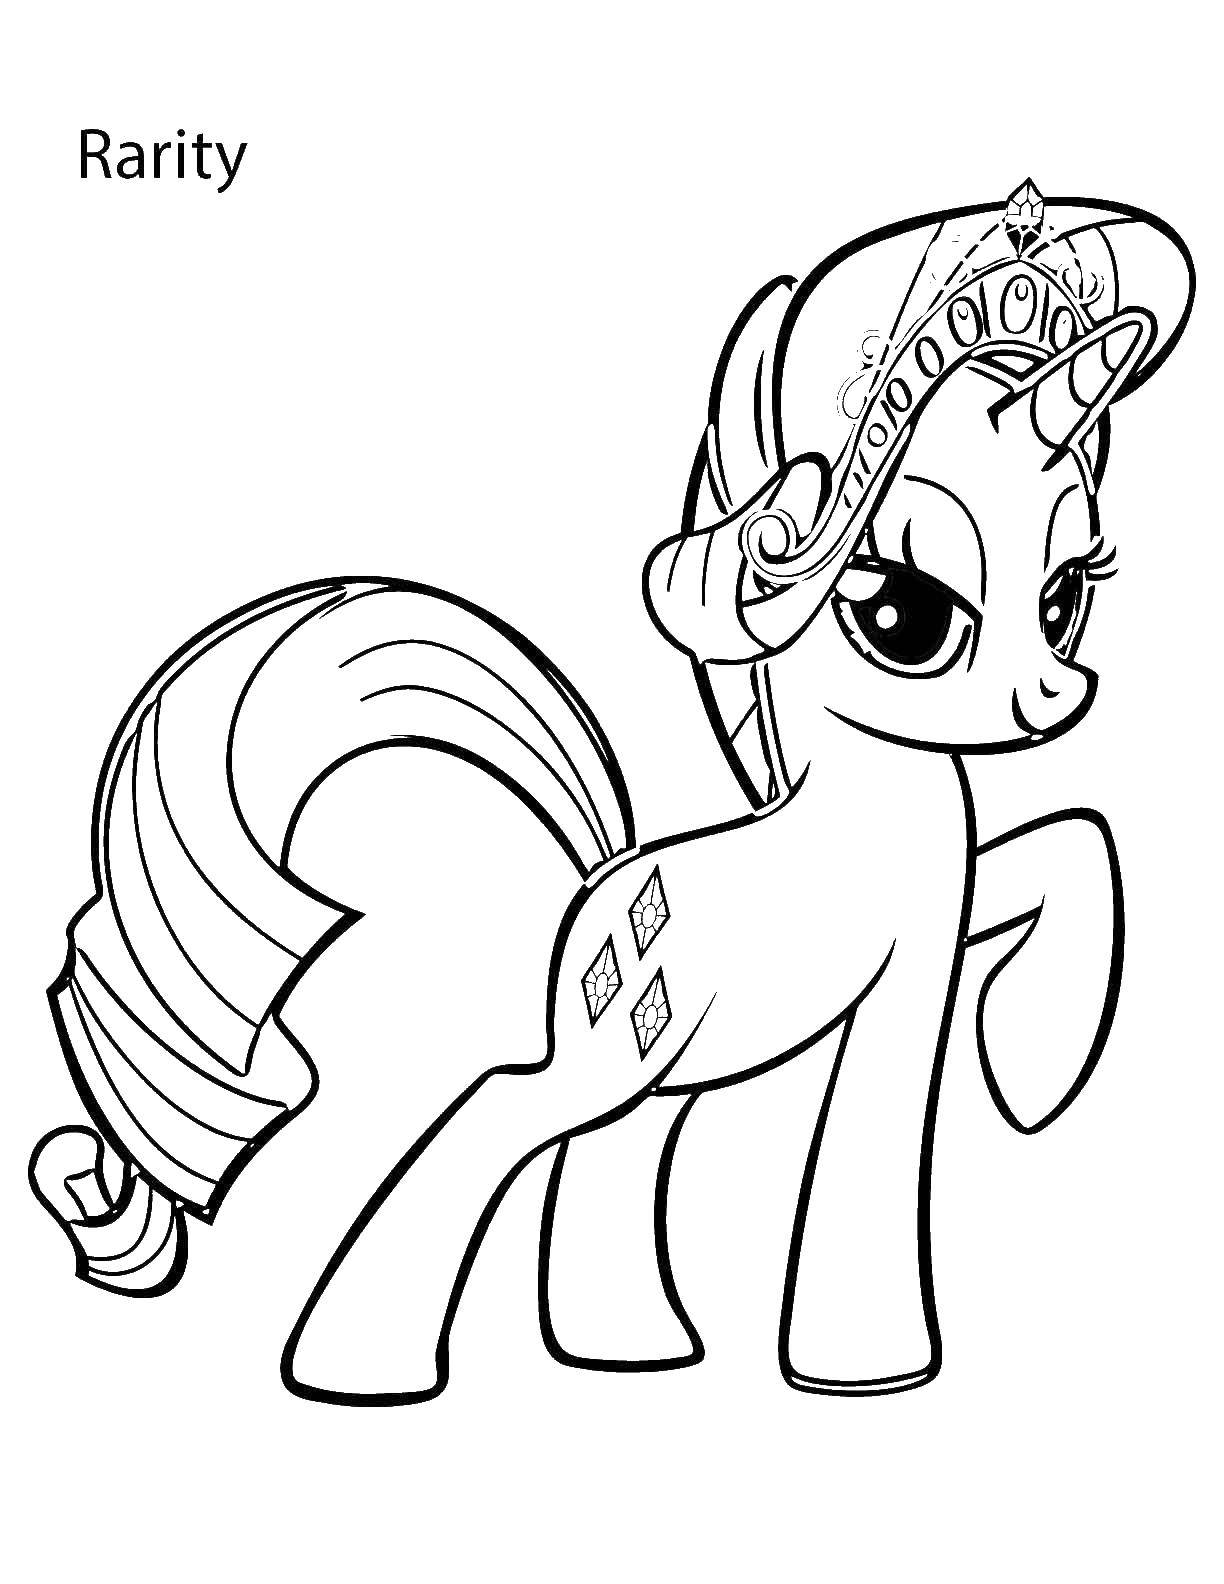 Coloring A rarity in the crown. Category my little pony. Tags:  that pony, Rarity.